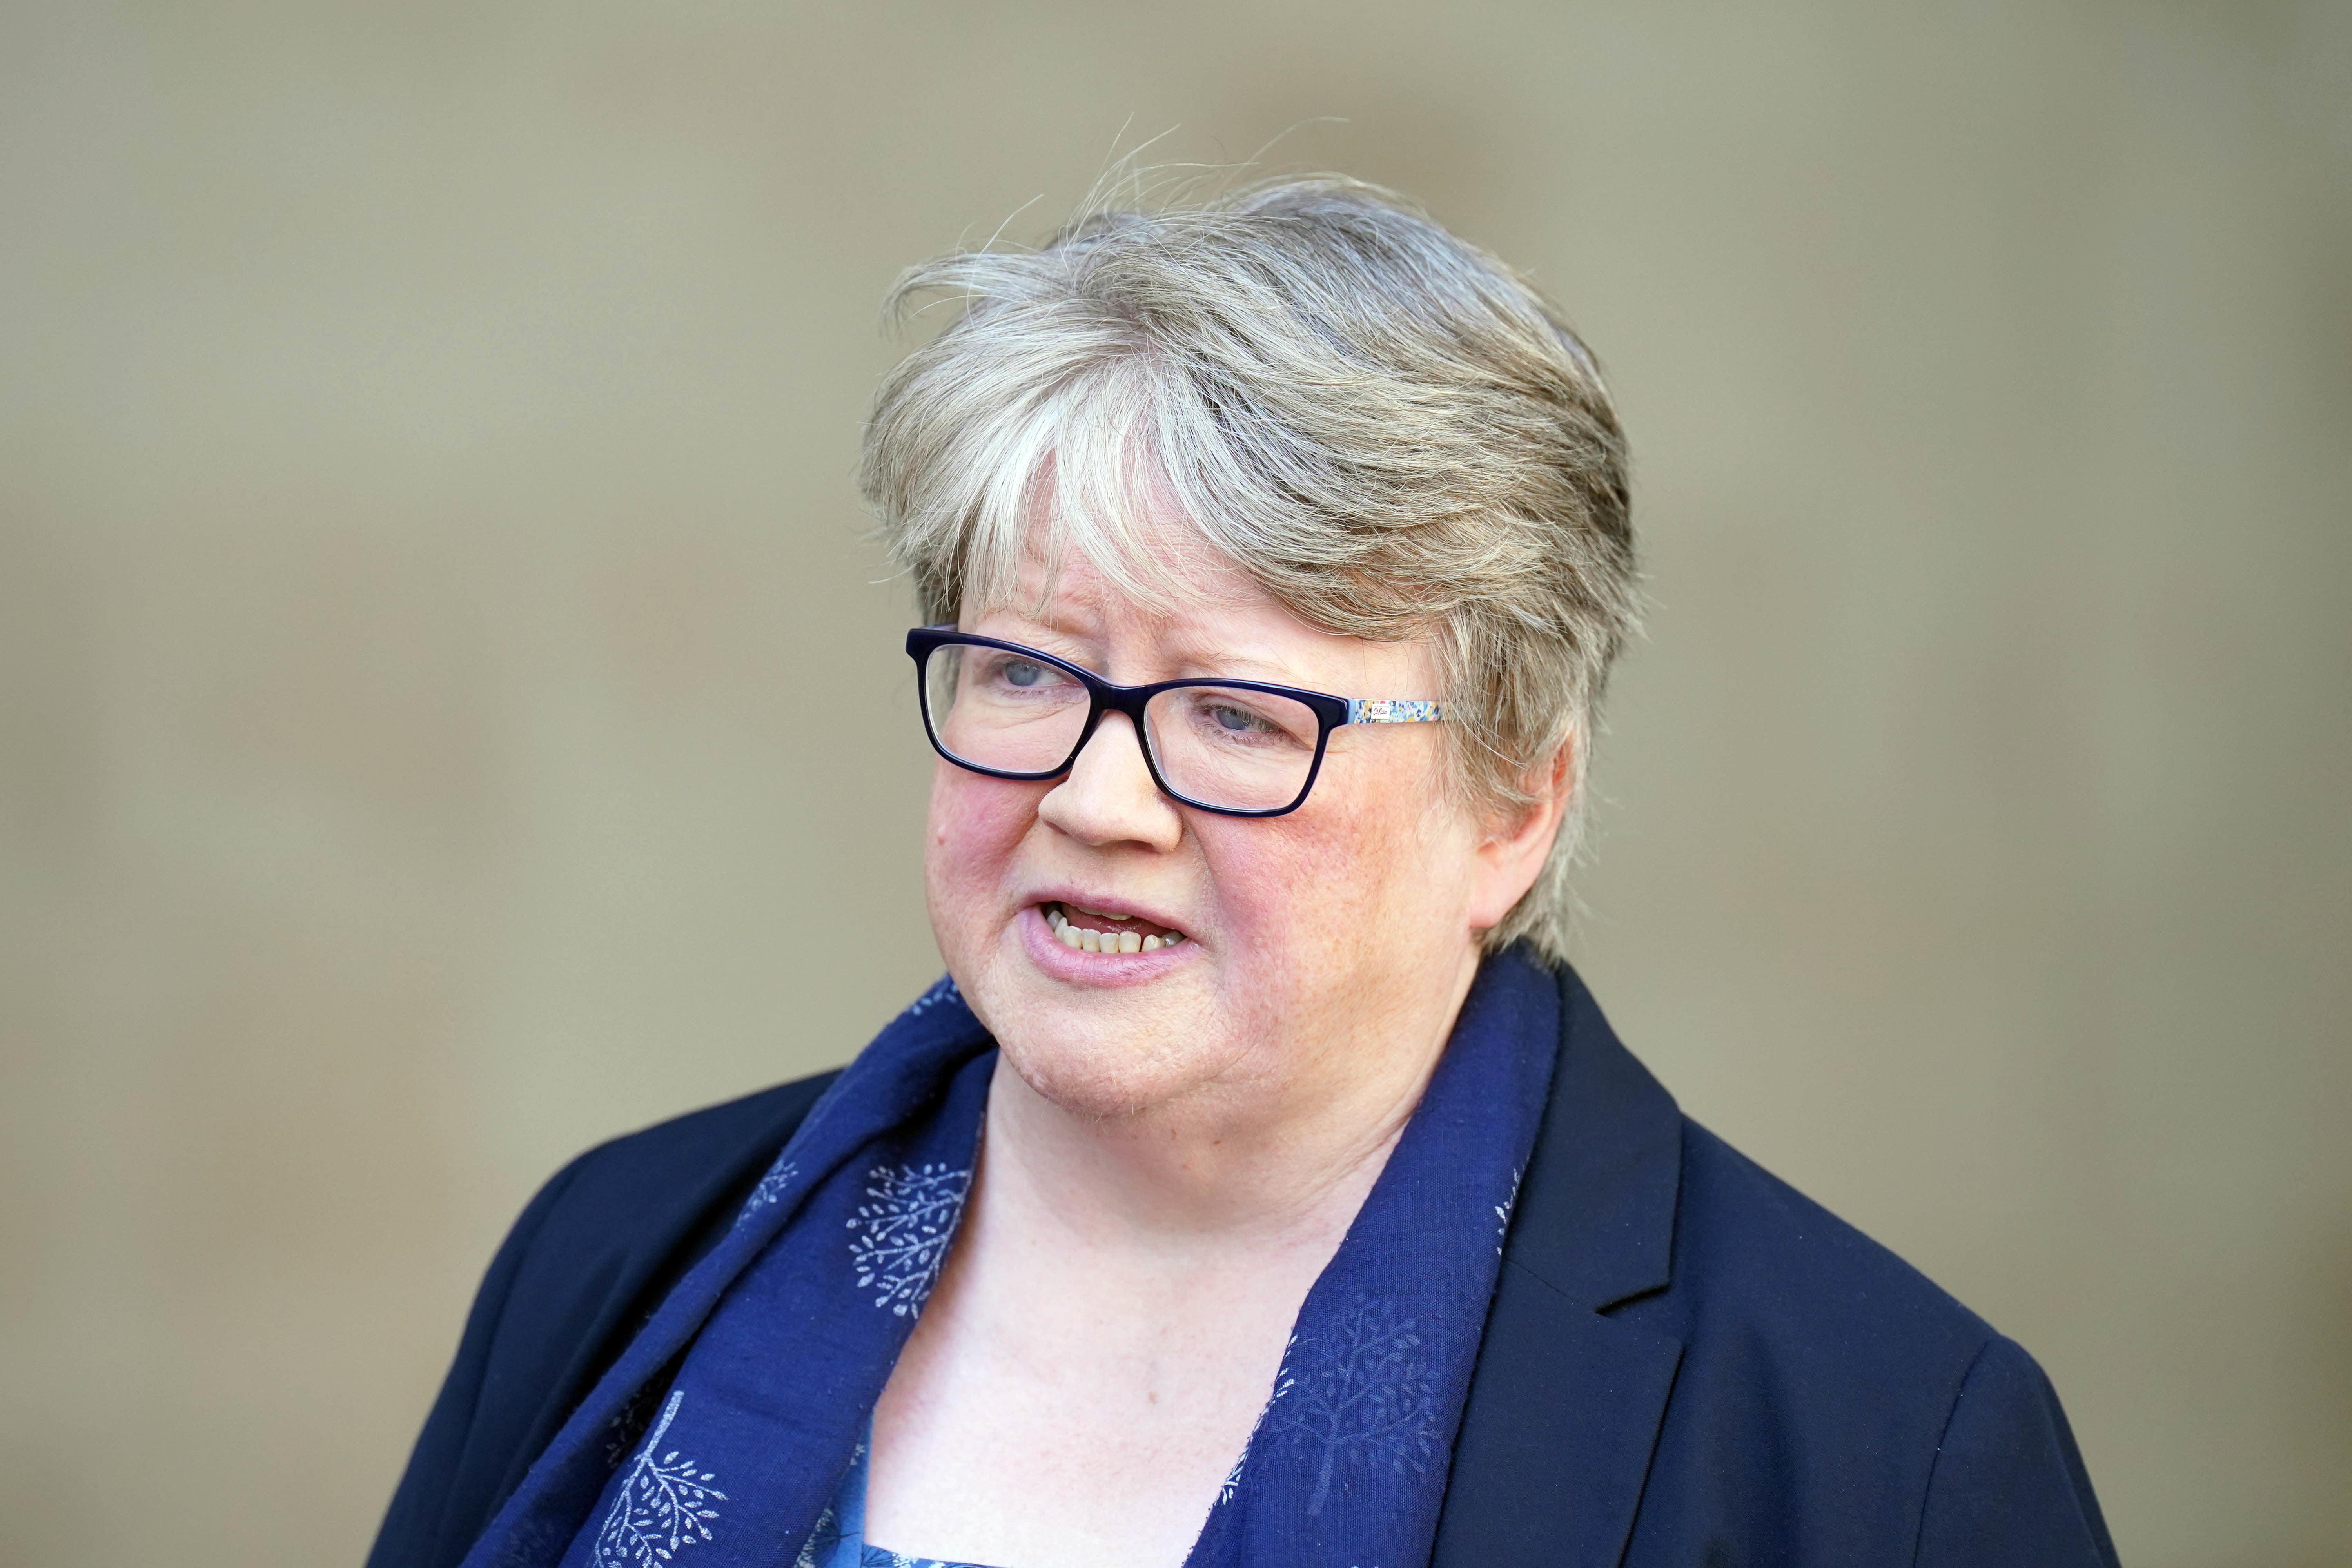 Former environment secretary Therese Coffey gets a damehood